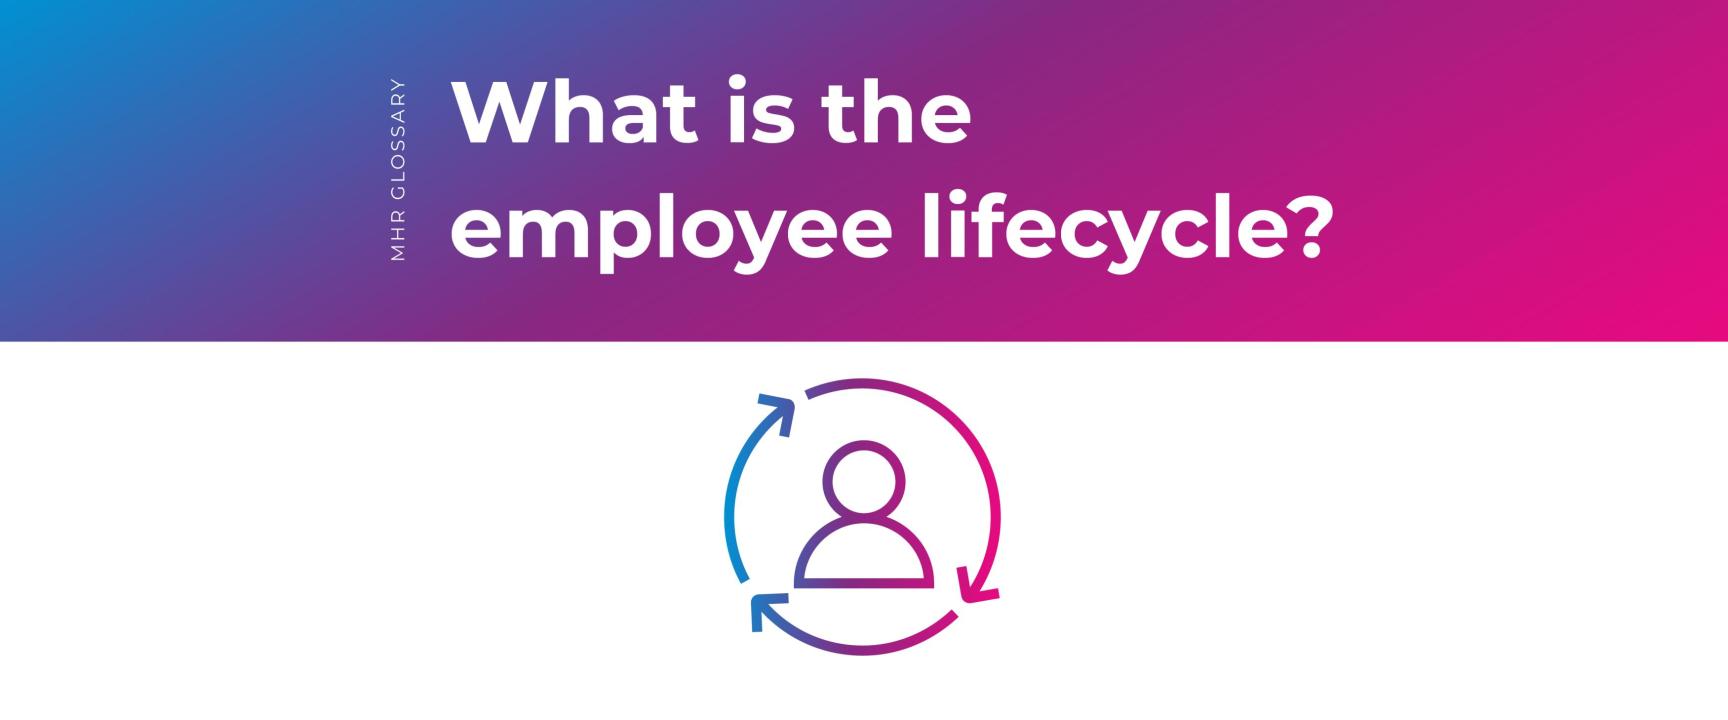 what is employee lifecycle? with an person icon, with arrows going around the icon.